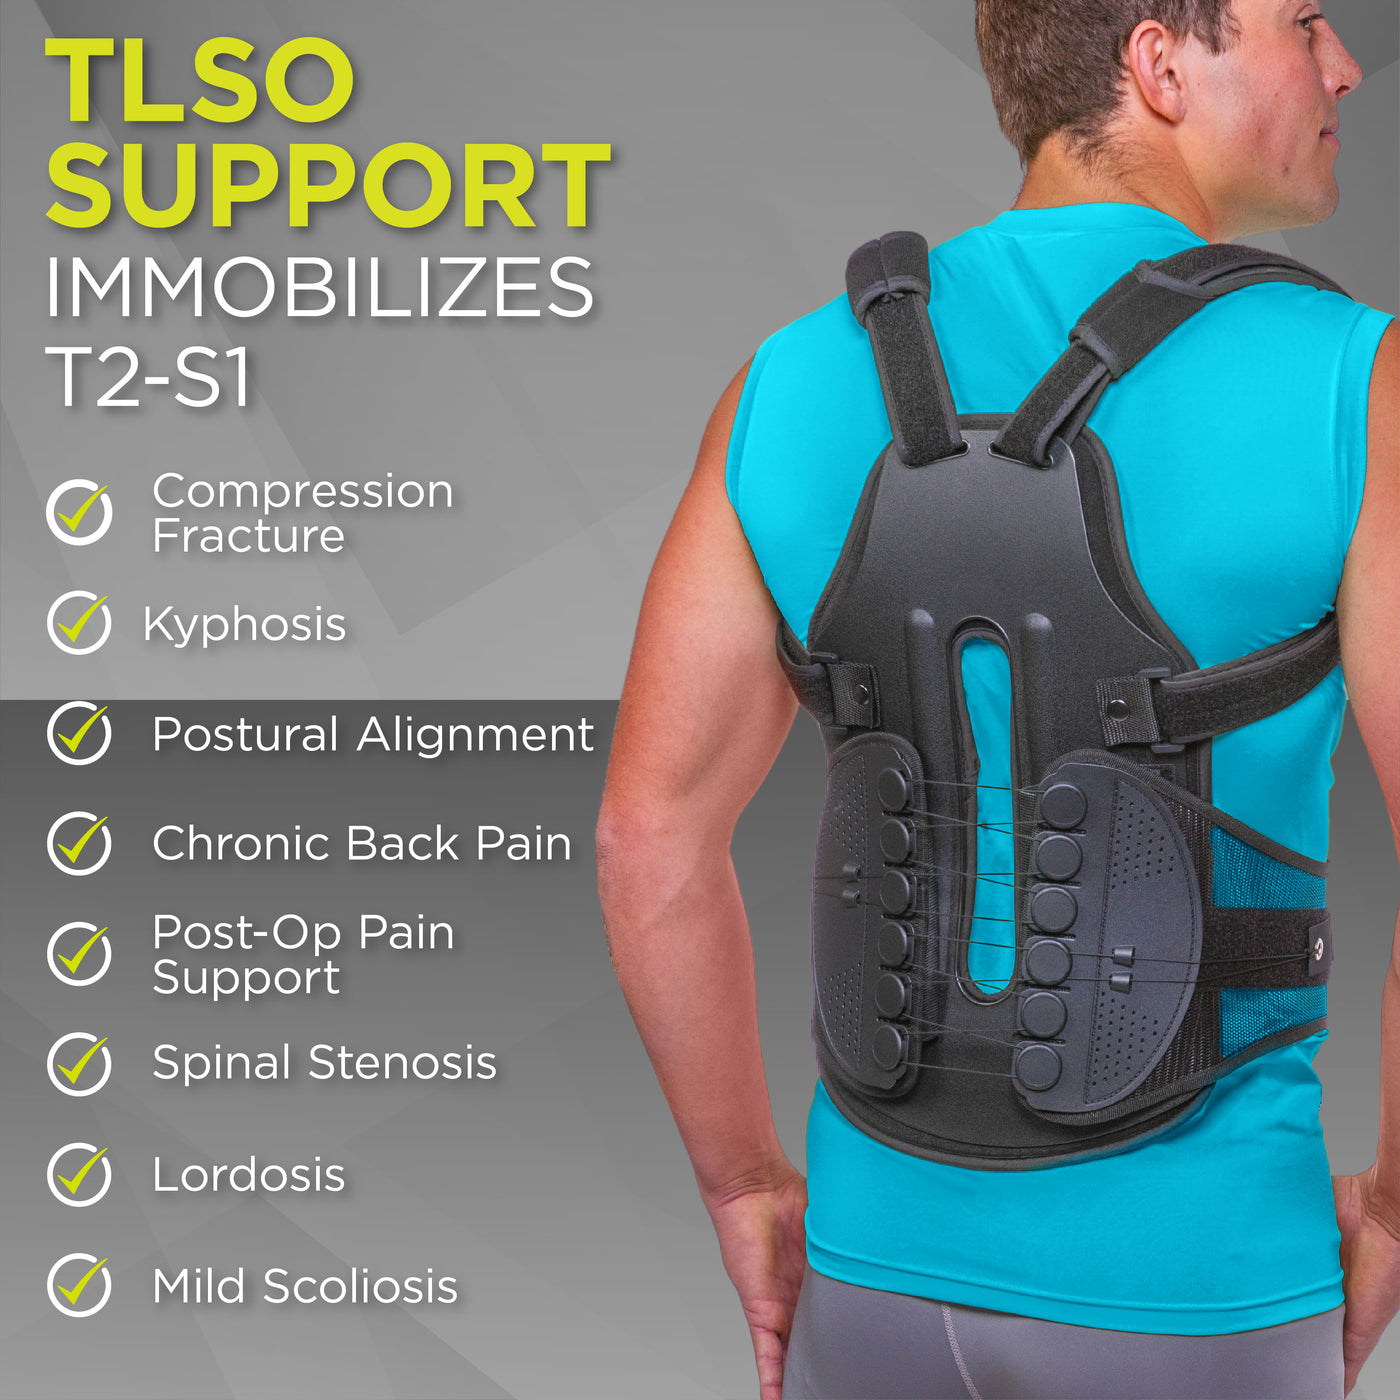 Our TLSO thoracic brace immobilizes the t2-s1 vertebra helping treat chronic back pain and herniated or bulging disc